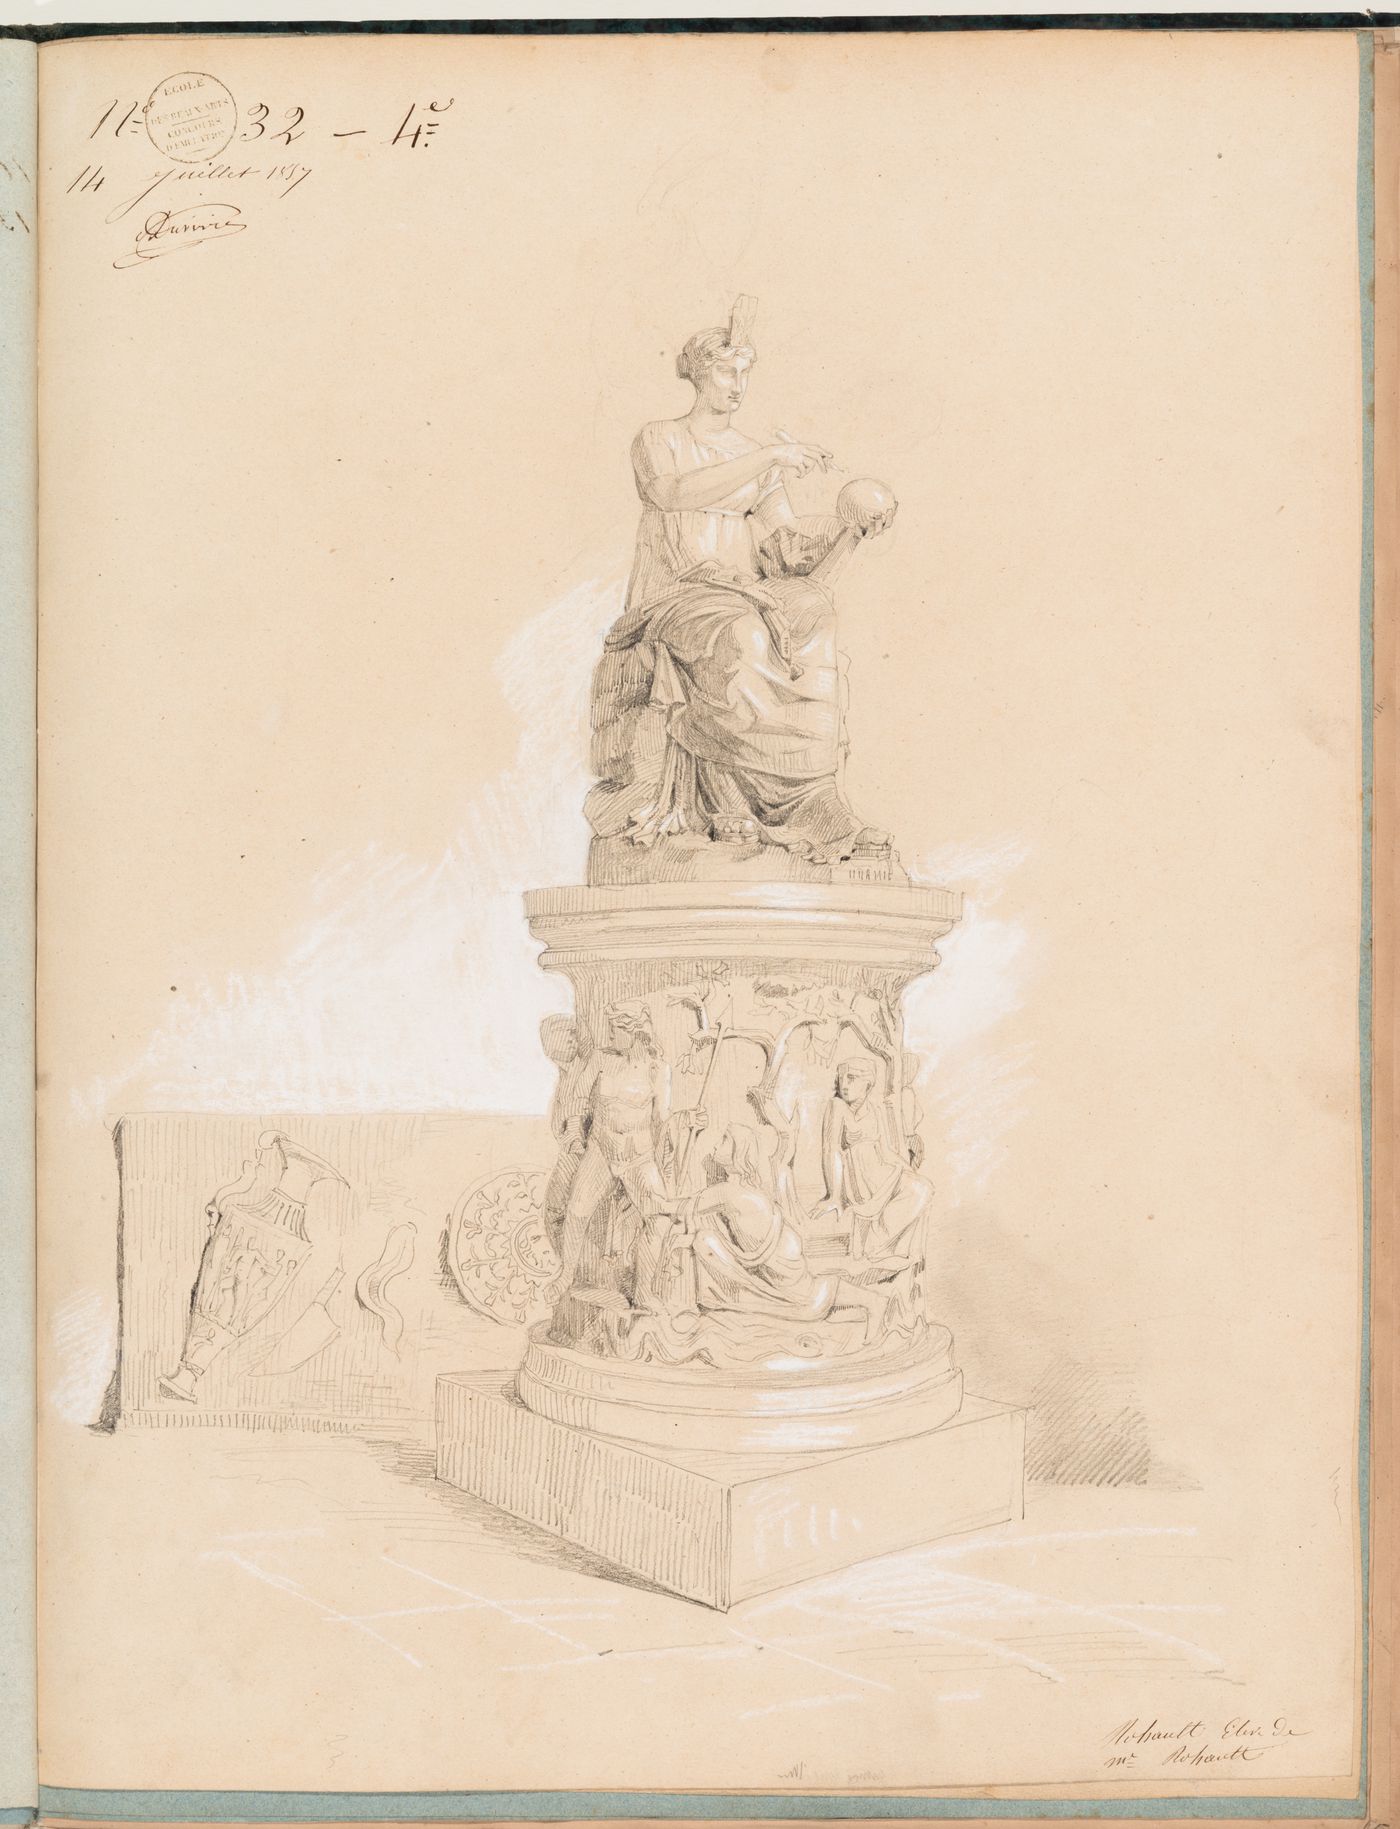 Concours d'émulation entry, 14 July 1857: Study of a statue of a seated female